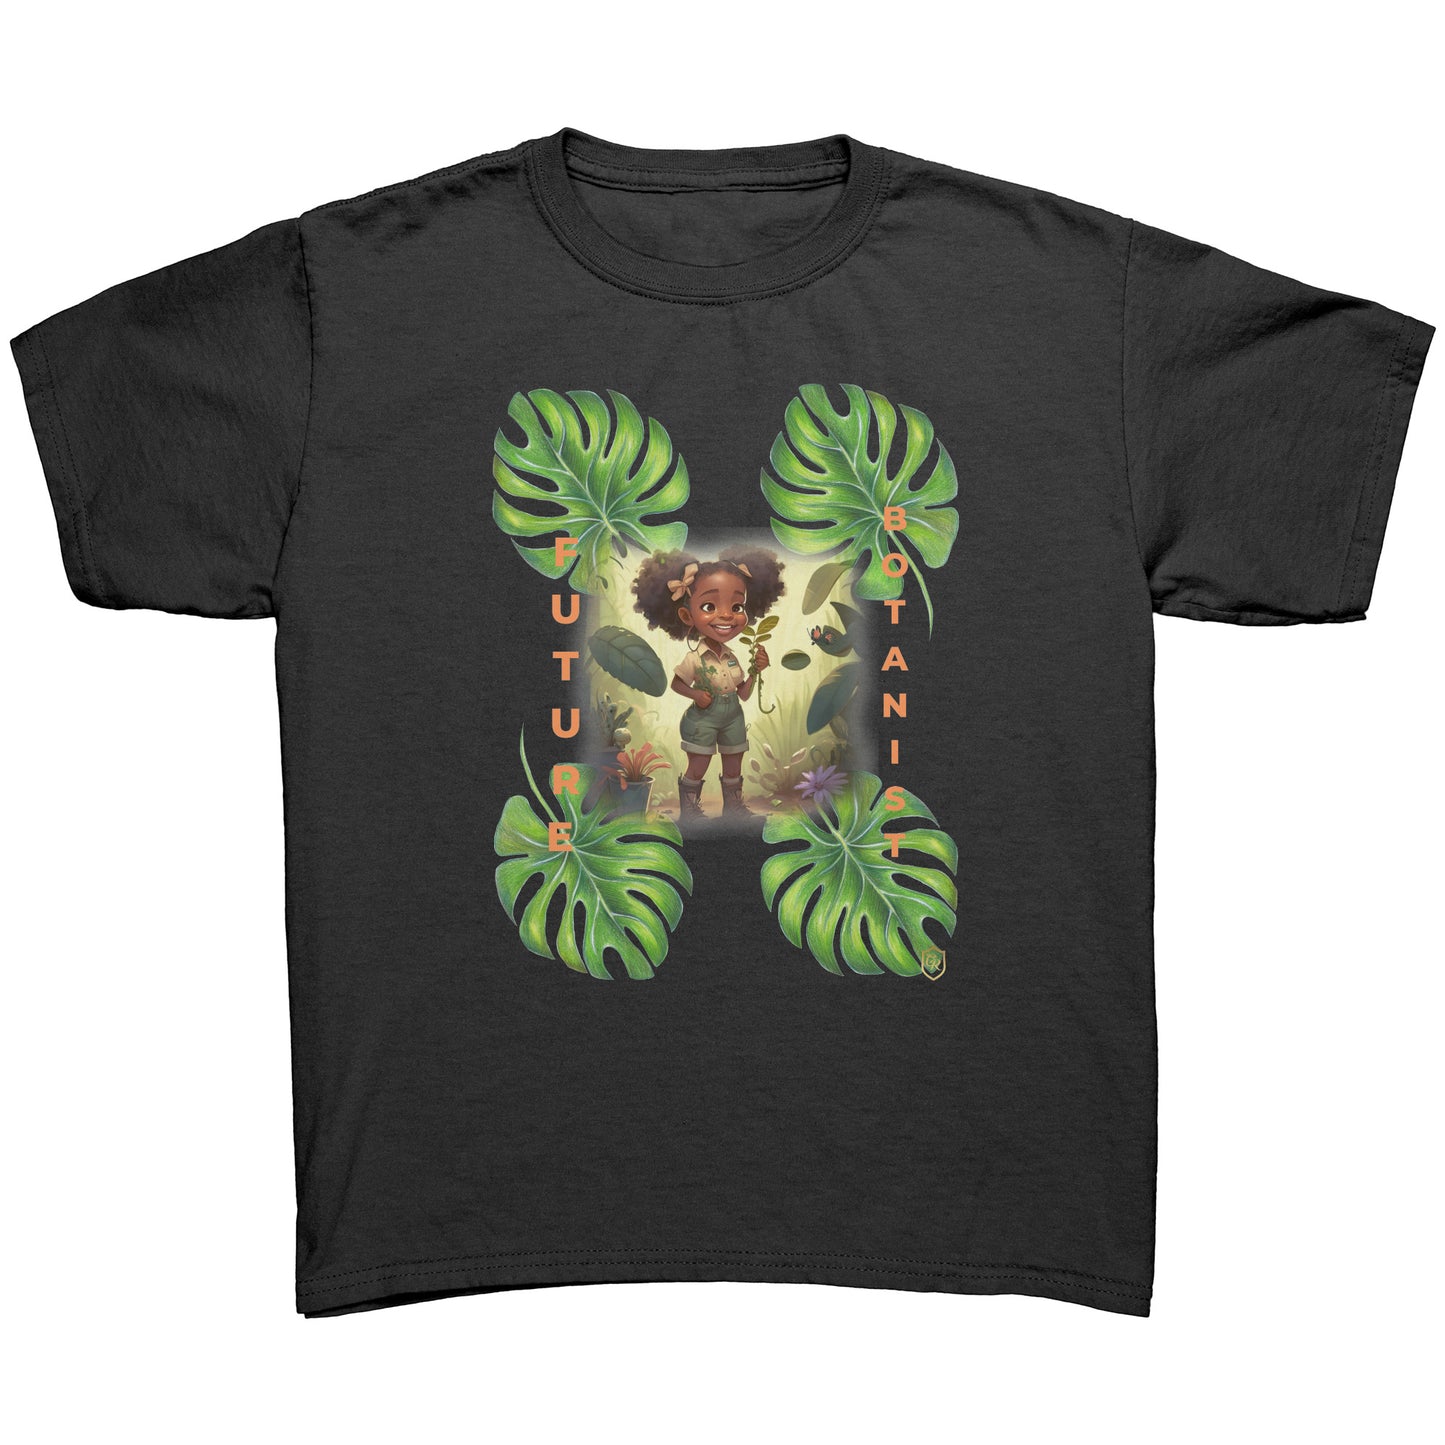 Young Girl's Botanist of the Future T-shirt